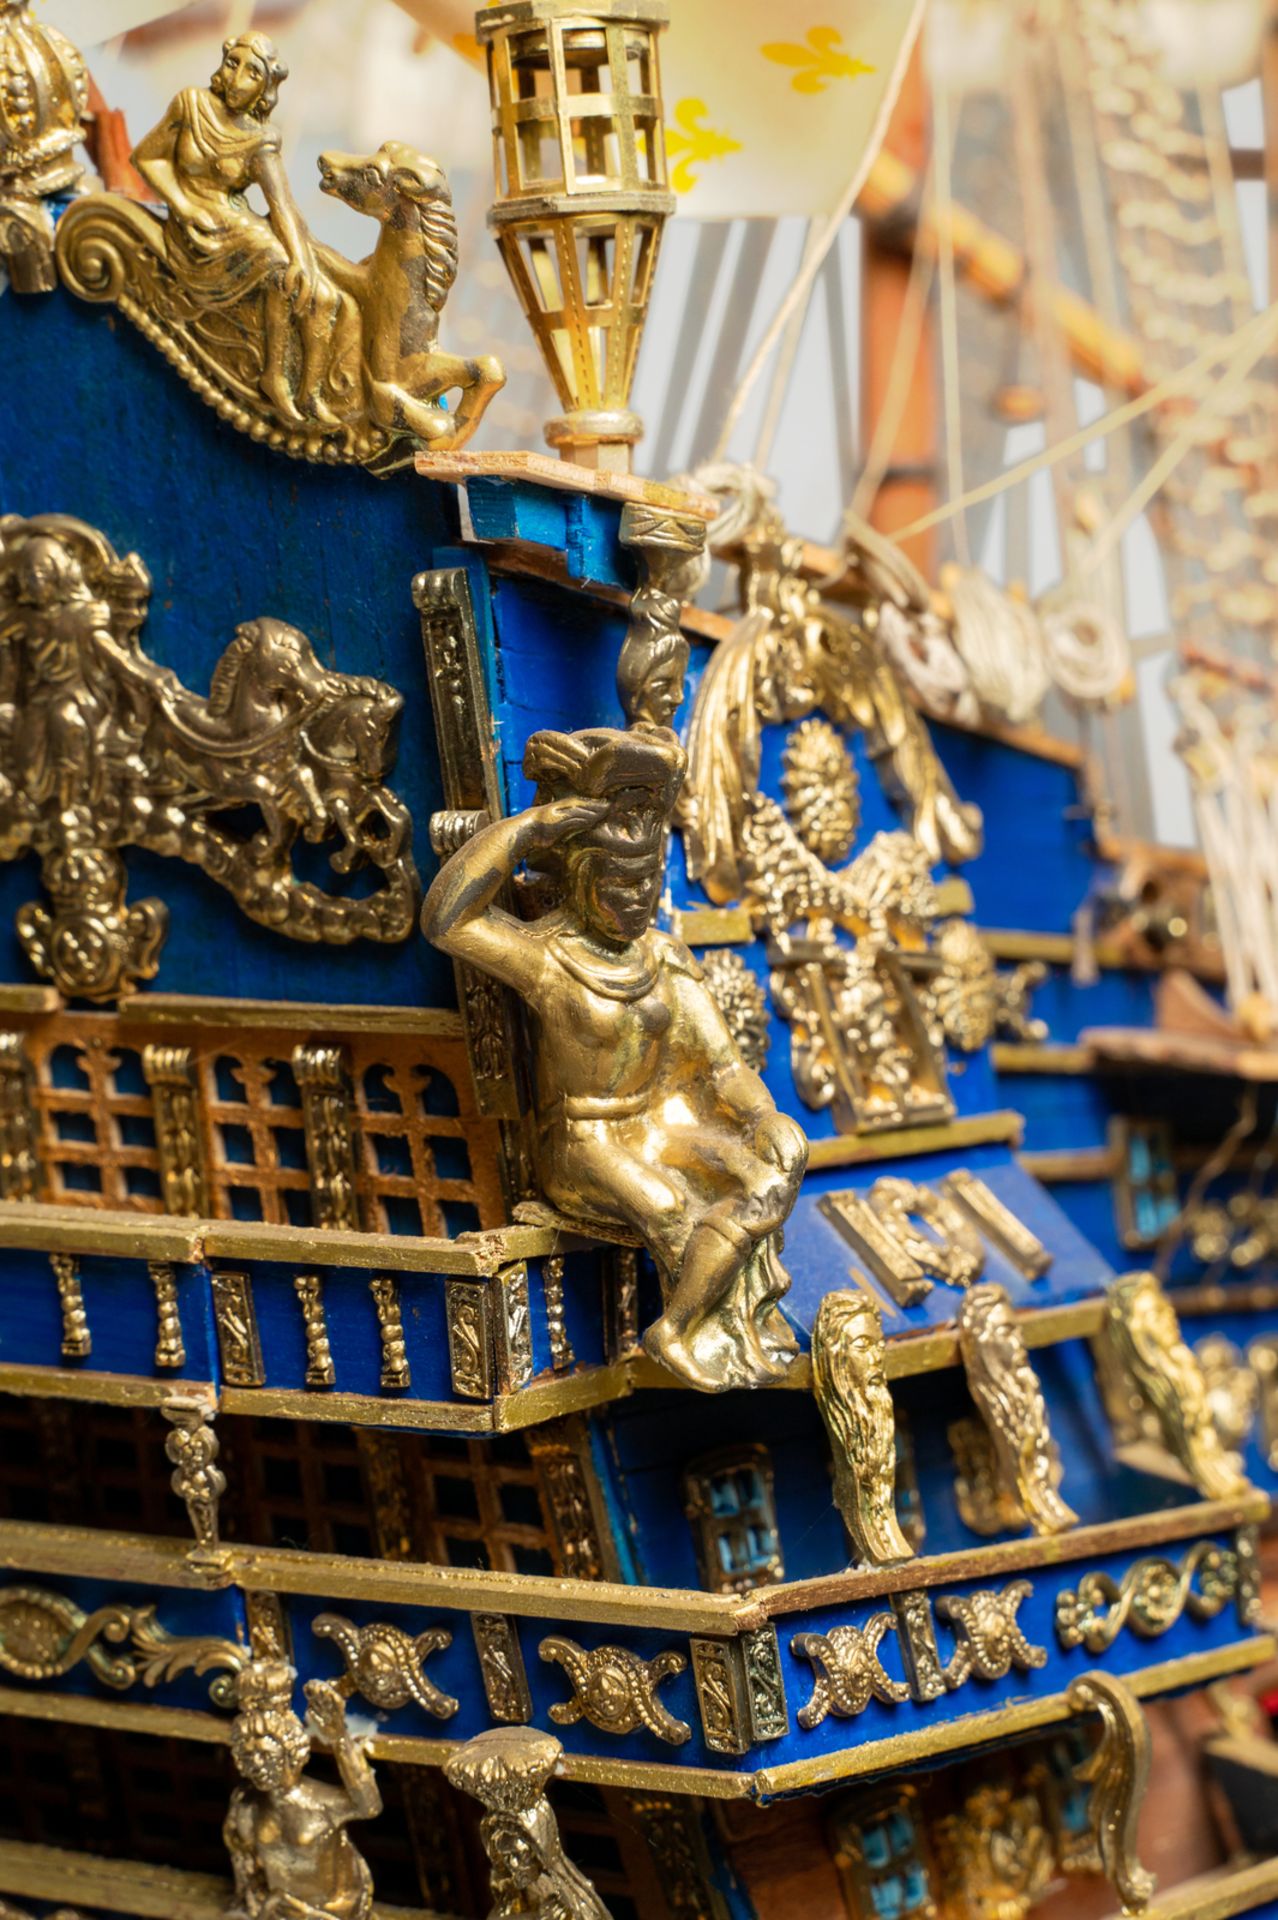 Model of sailing ship Louis XIV. France, 20th century. - Image 3 of 3